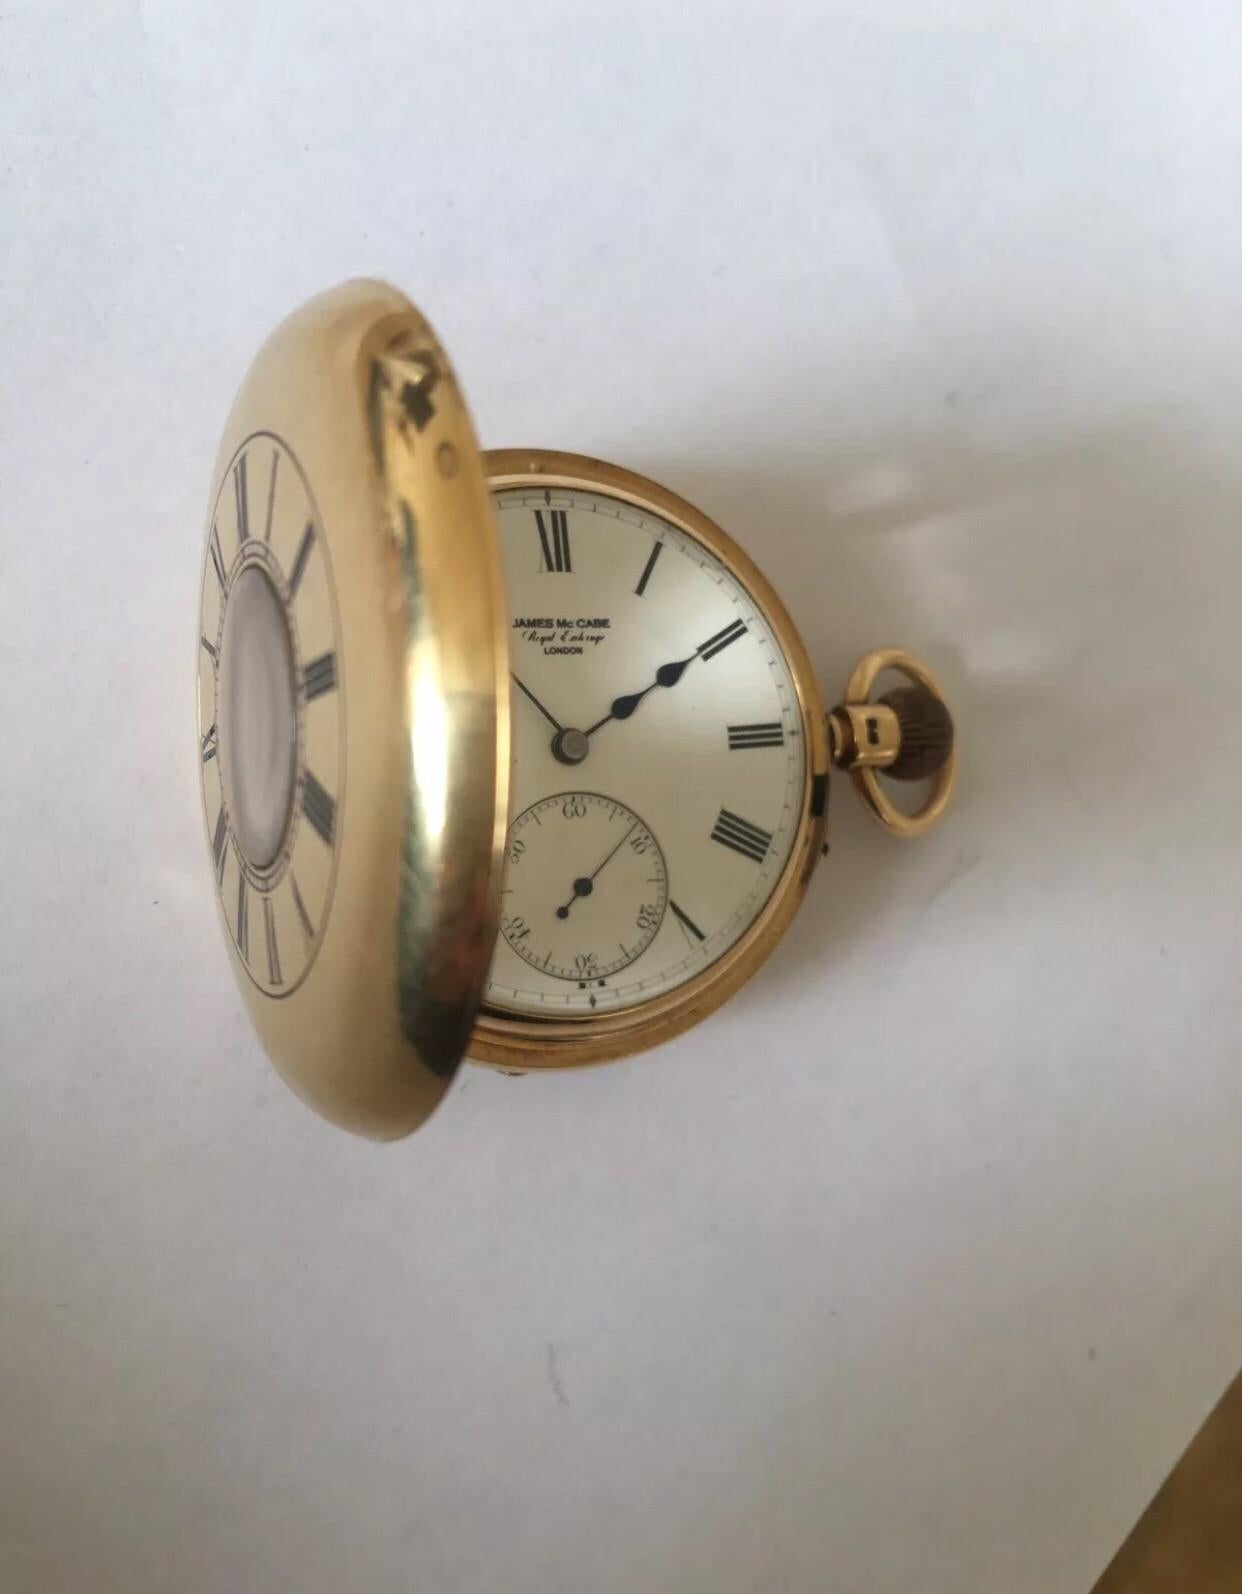 18K Gold Antique Half Hunter Pocket Watch Signed James McCabe, Royal Exchange London 

This 50mm diameter pocket watch is in good working condition and it is ticking well. Whilst this watch is old and antique we cannot guarantee the time accuracy.